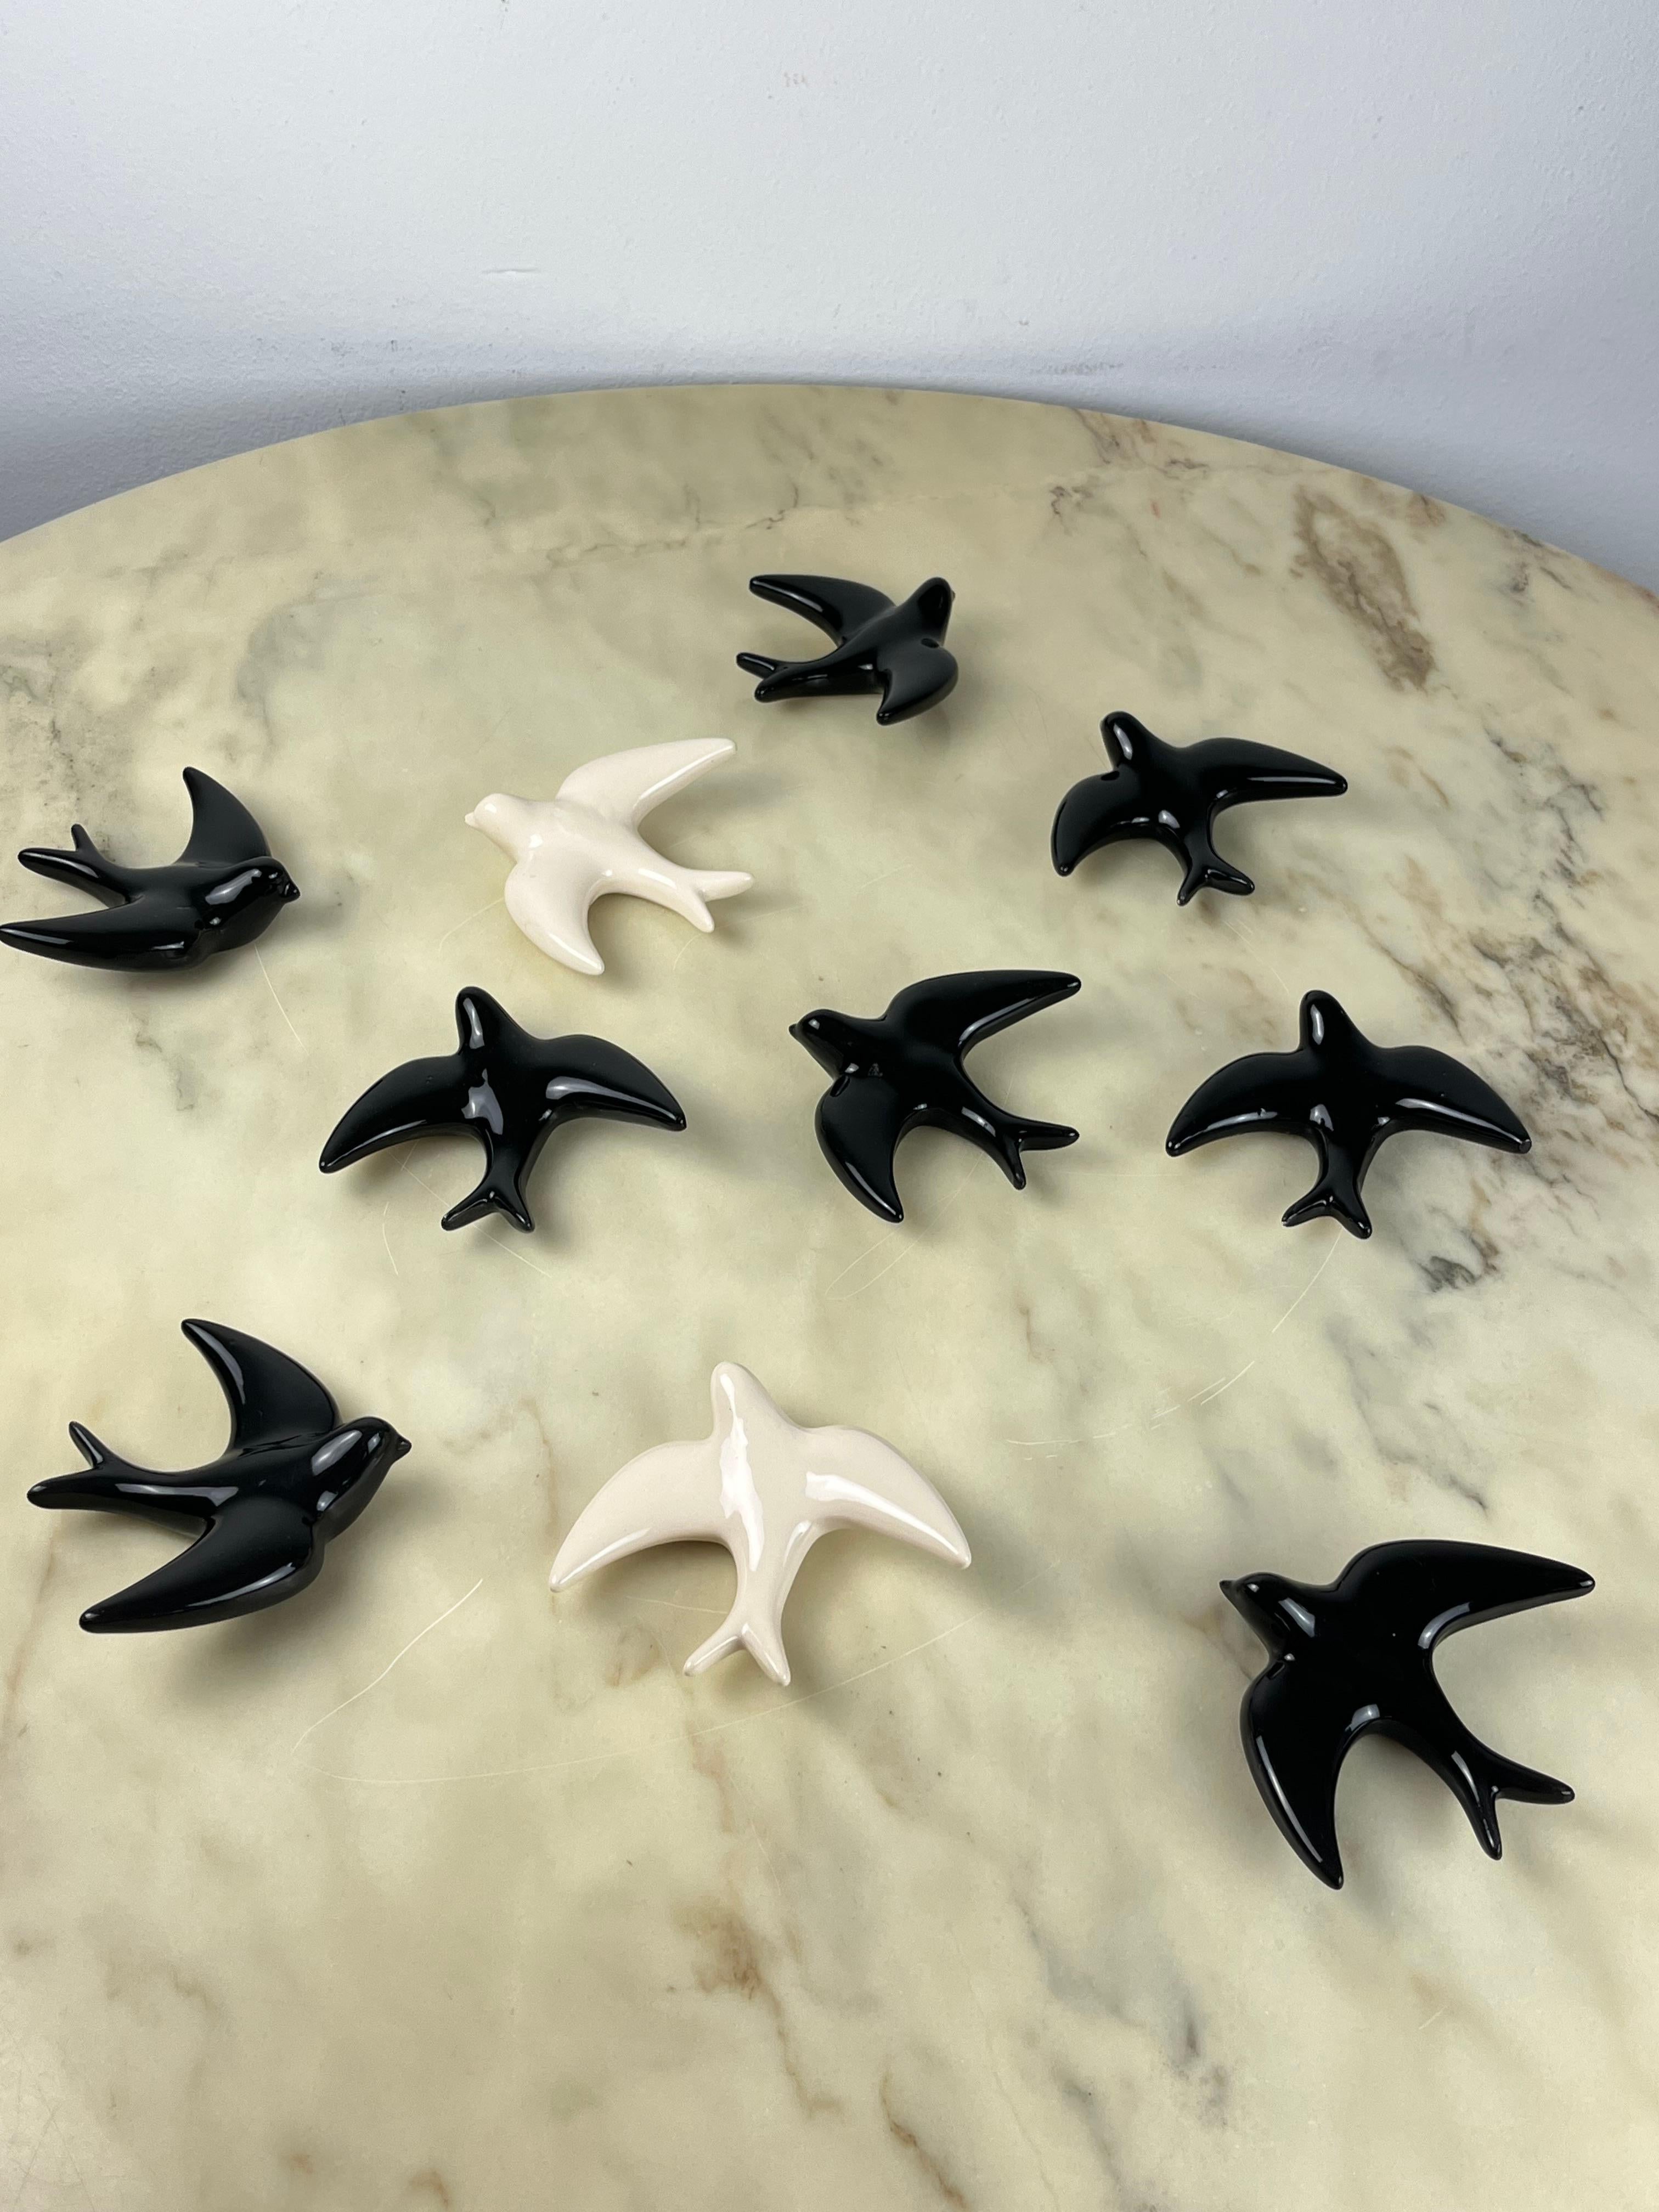 Set of 10 glazed ceramic swallows, Italy, 1960s
Delightful vintage ornaments, depicting a flock of birds in flight.
Intact. Excellent condition with imperceptible signs of aging. Eight are dark and two are light.